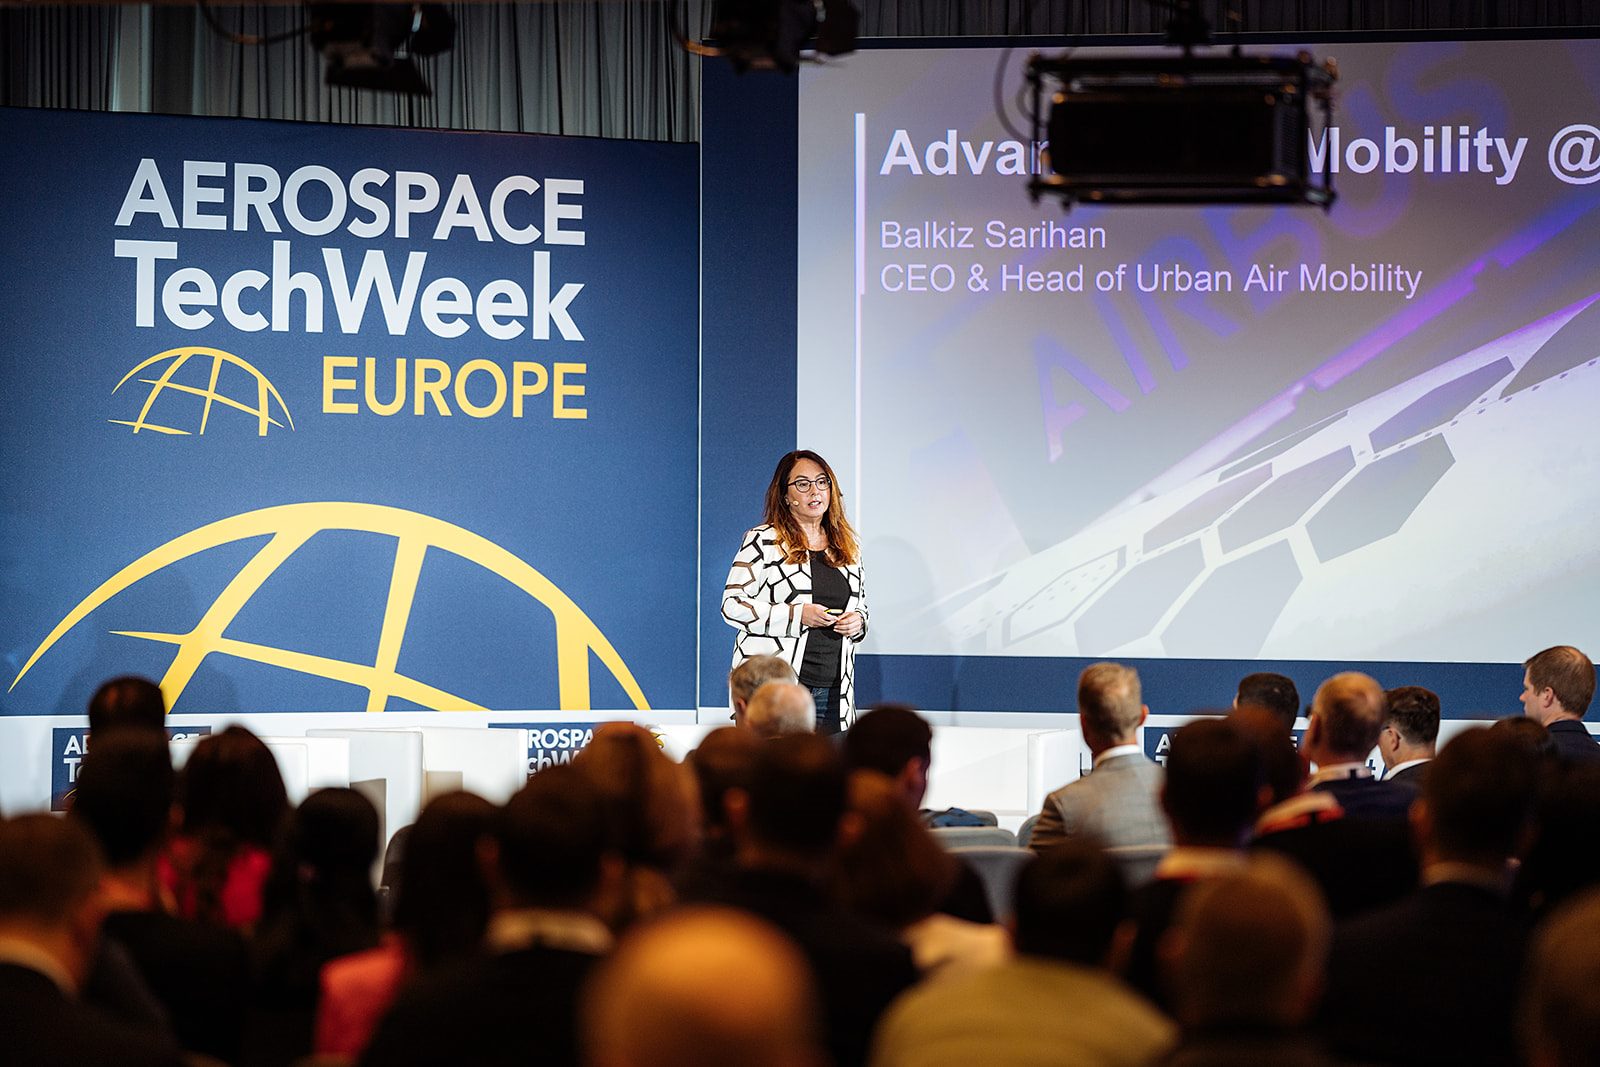 Conference at Aerospace Tech week